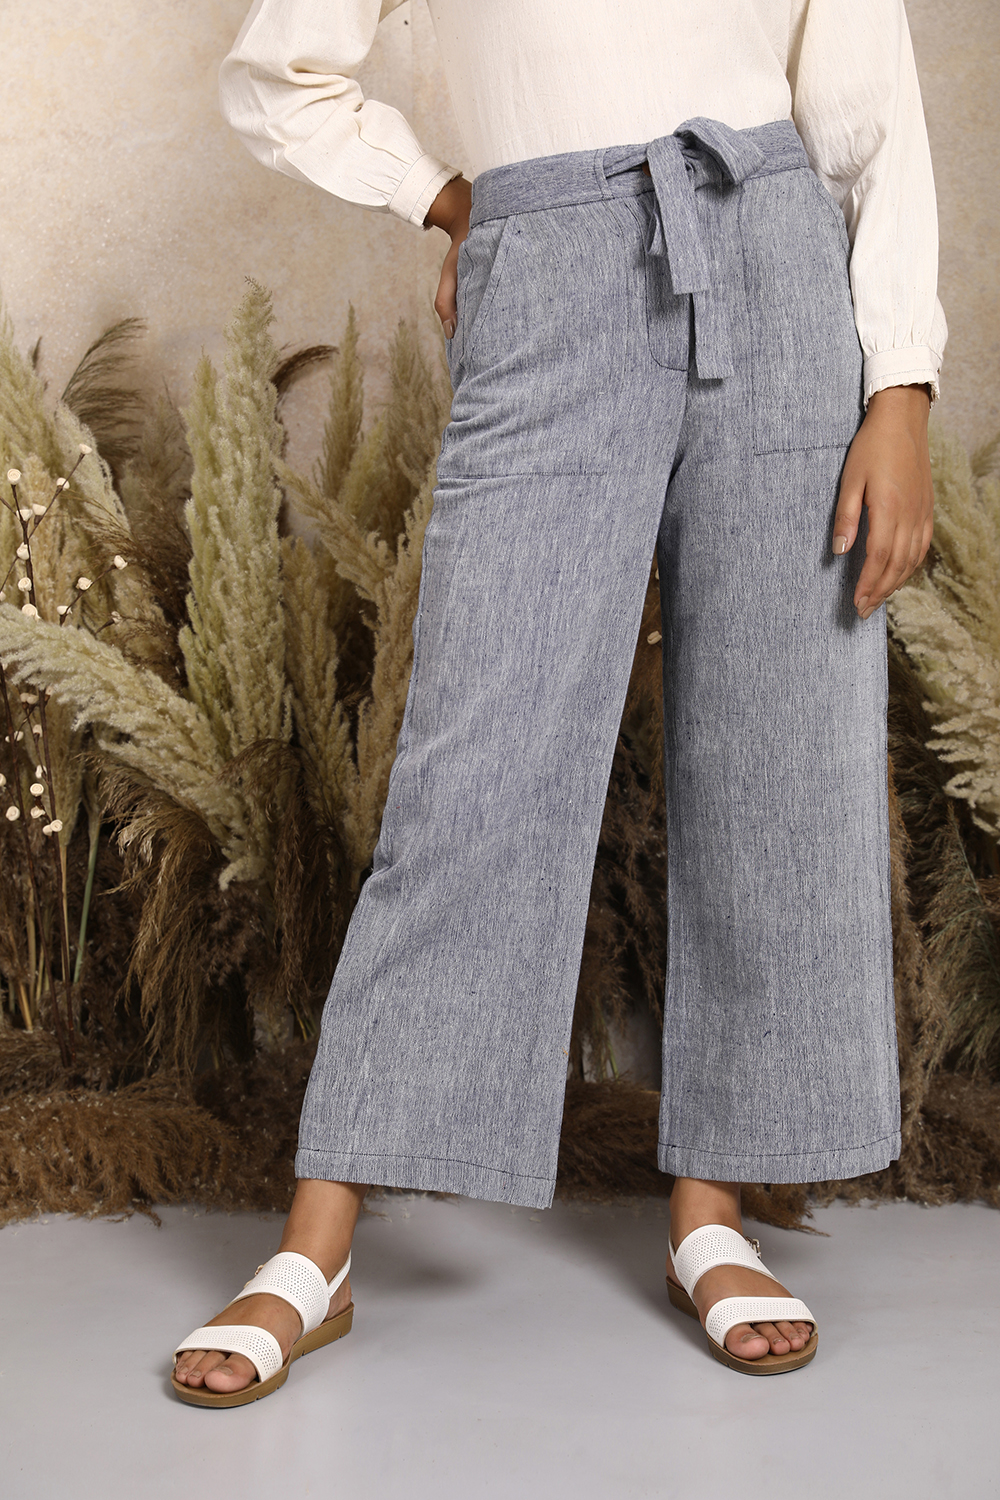 Handwoven Kala Cotton Tie-up Waist Wideleg Pants in Blue. Women's ankle length cotton pants by Vegan clothing brands India